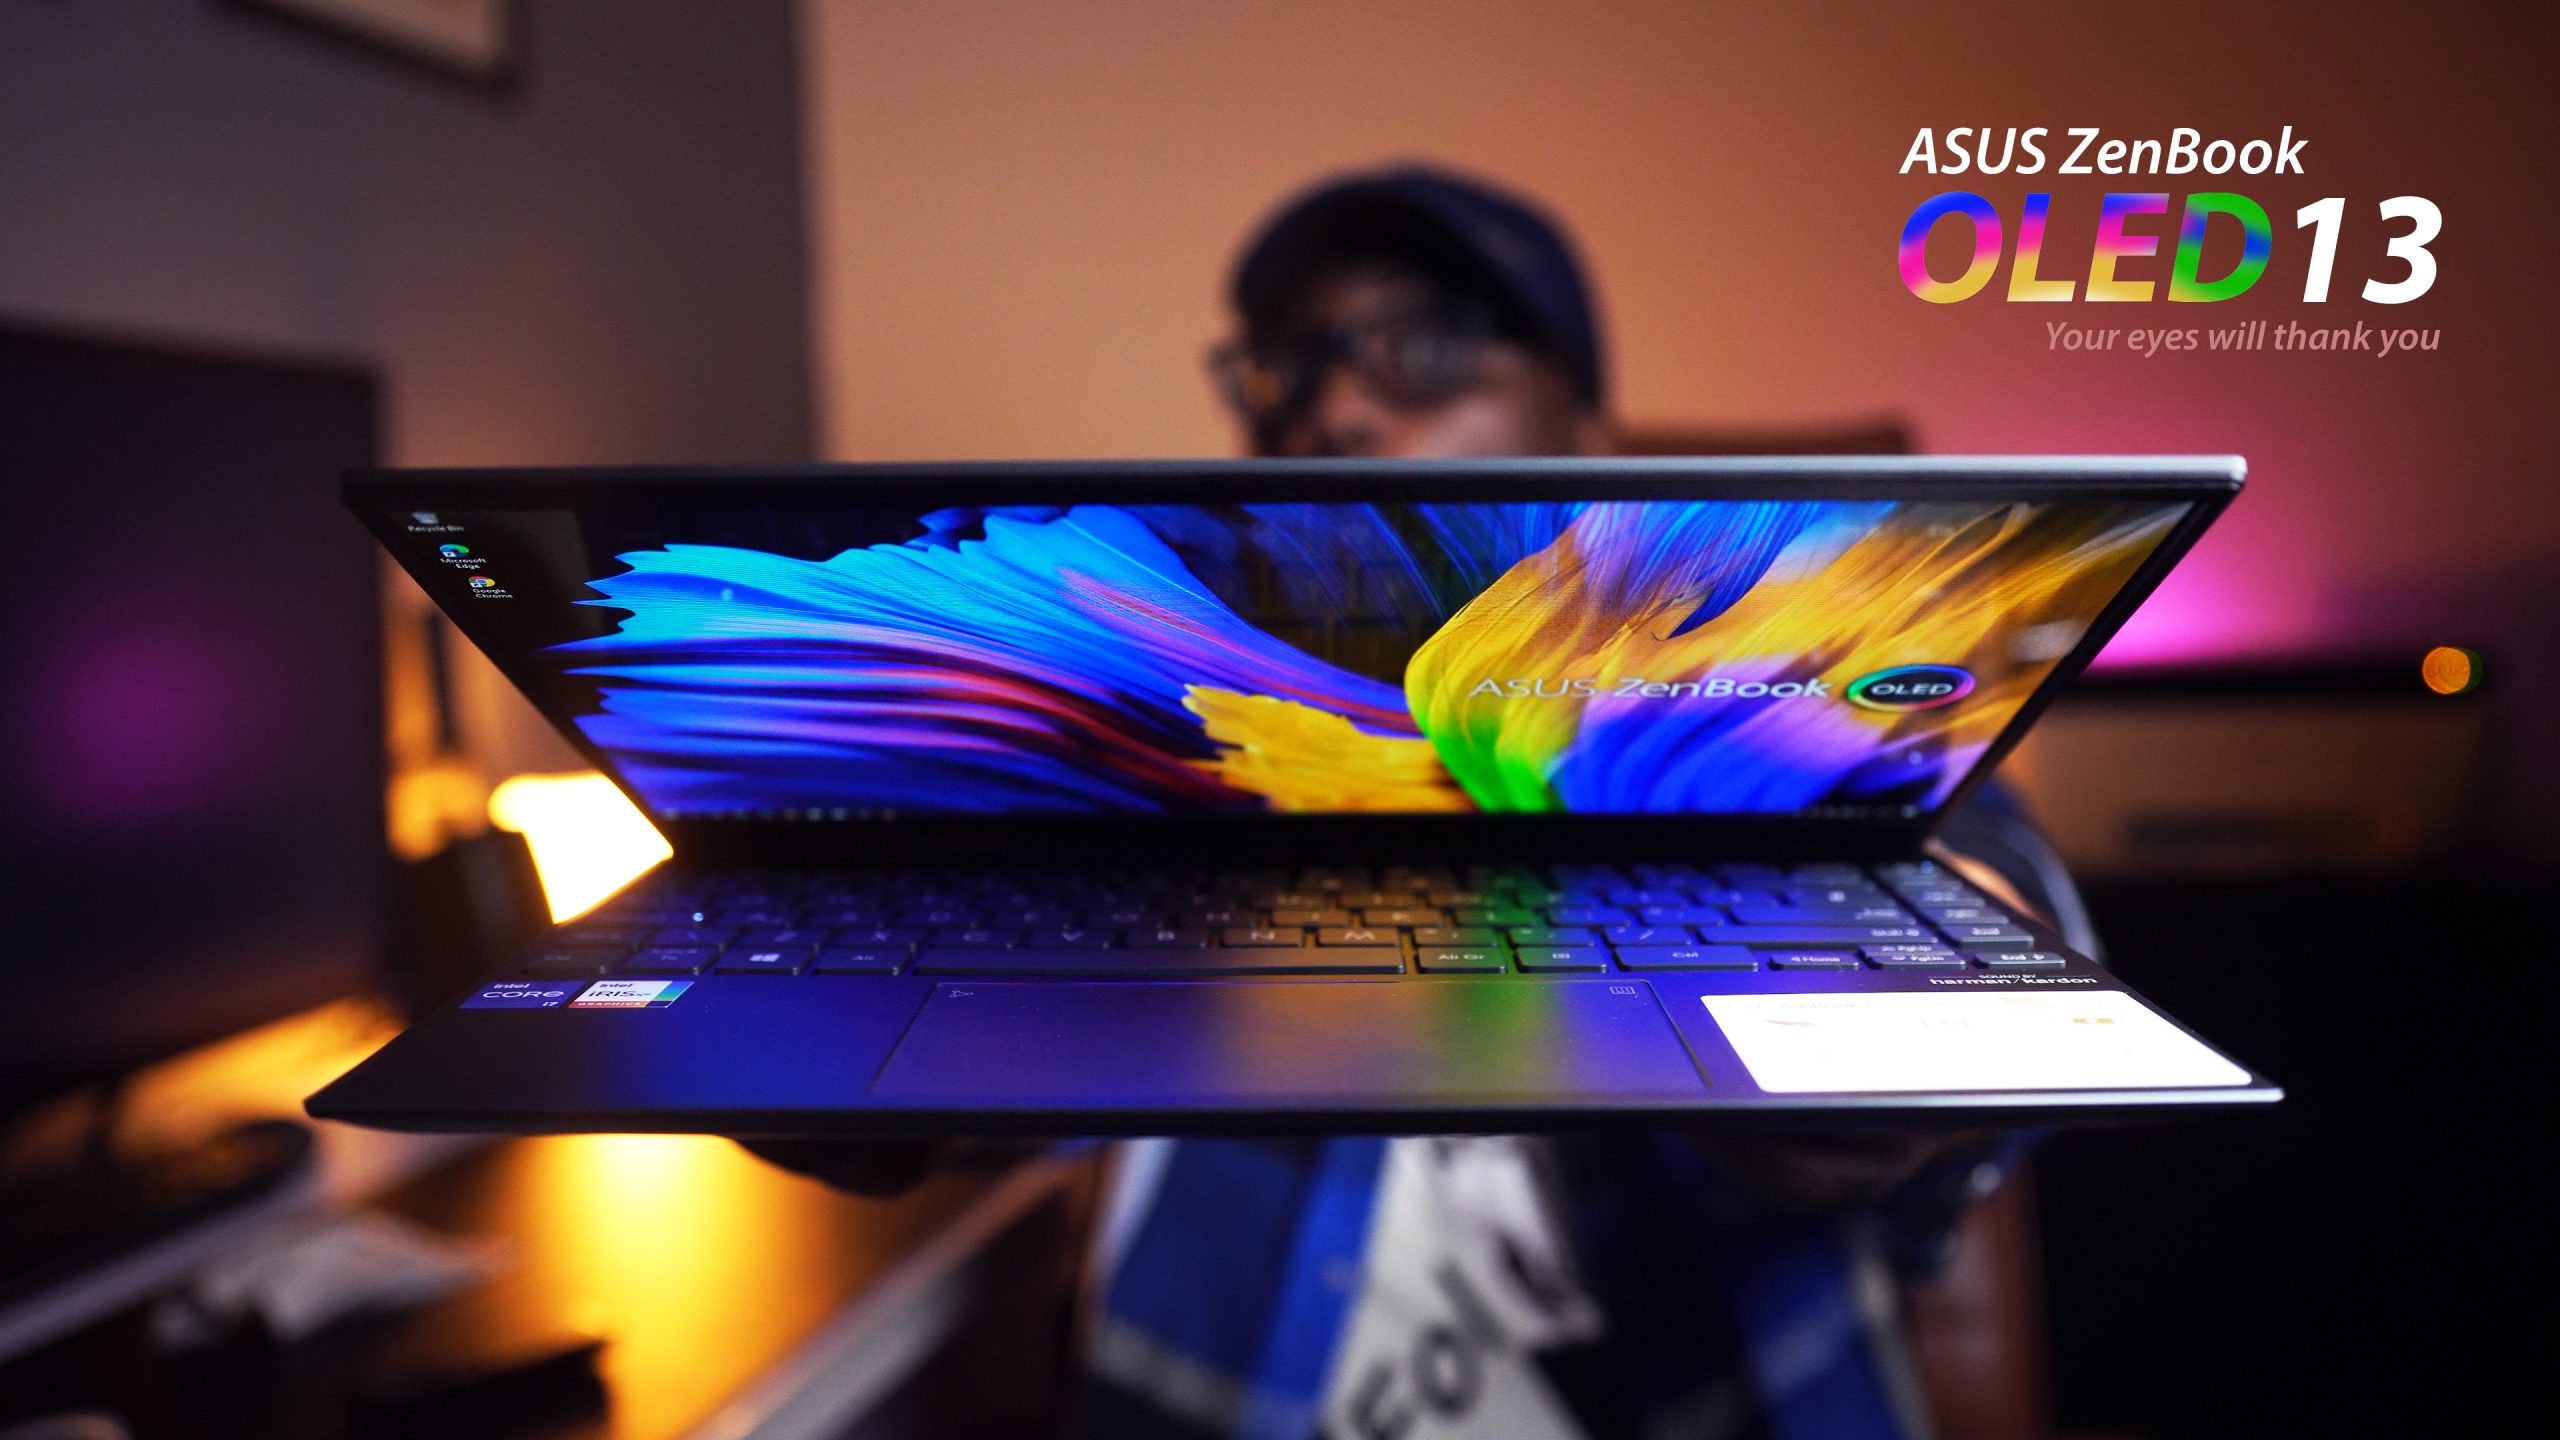 ASUS ZenBook OLED 13 (UX325) – Treat your eyes to stunning visuals